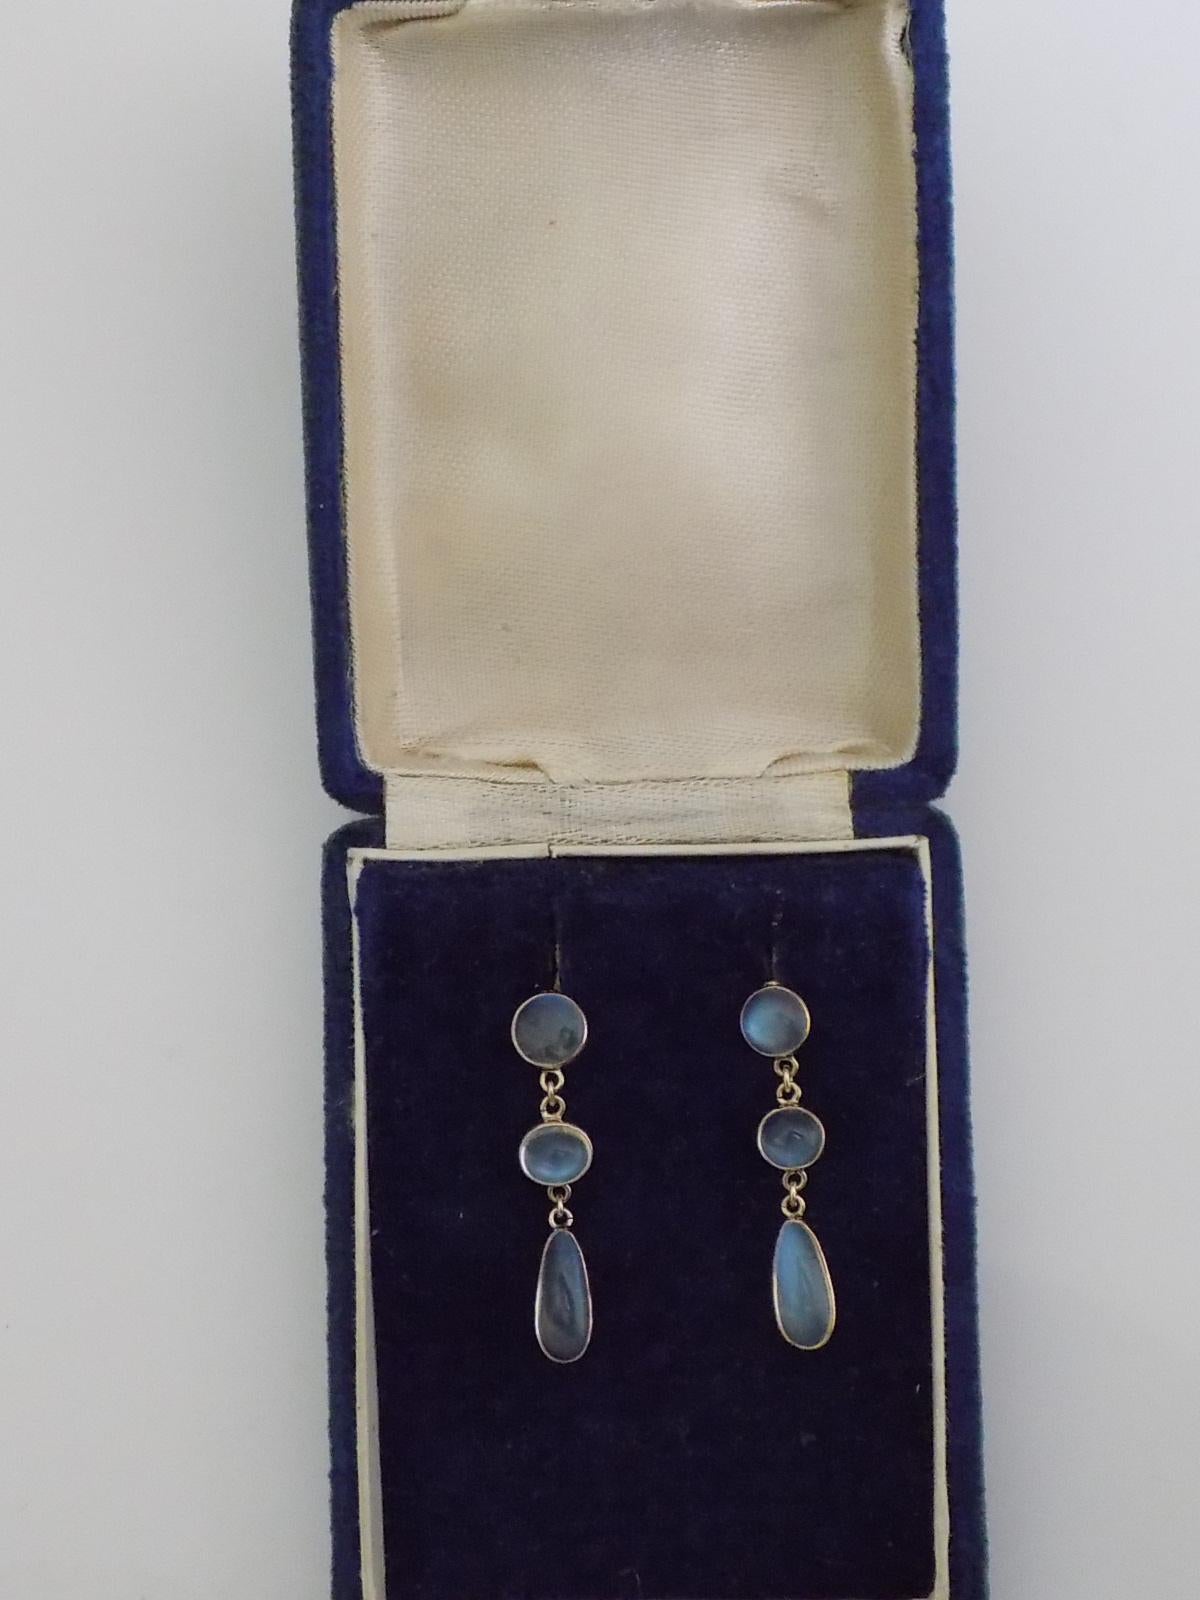 Stunning Edwardian Gold and Moonstone Drop Earrings 3